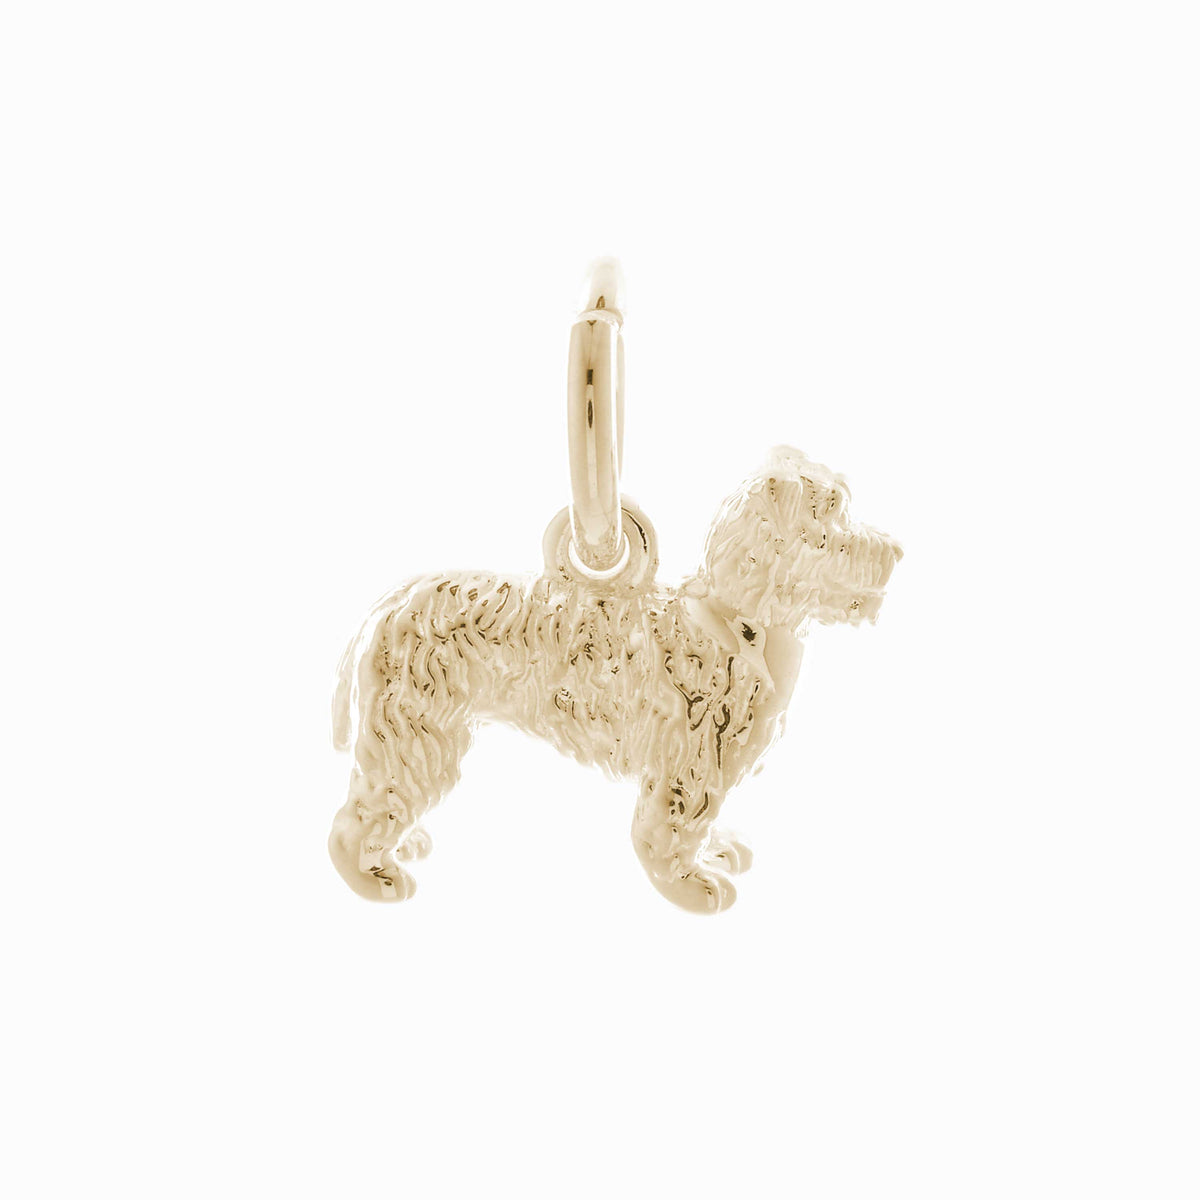 Solid 9ct gold Miniature Schnauzer charm with tiny bandana (optional), perfect for a charm bracelet or necklace.